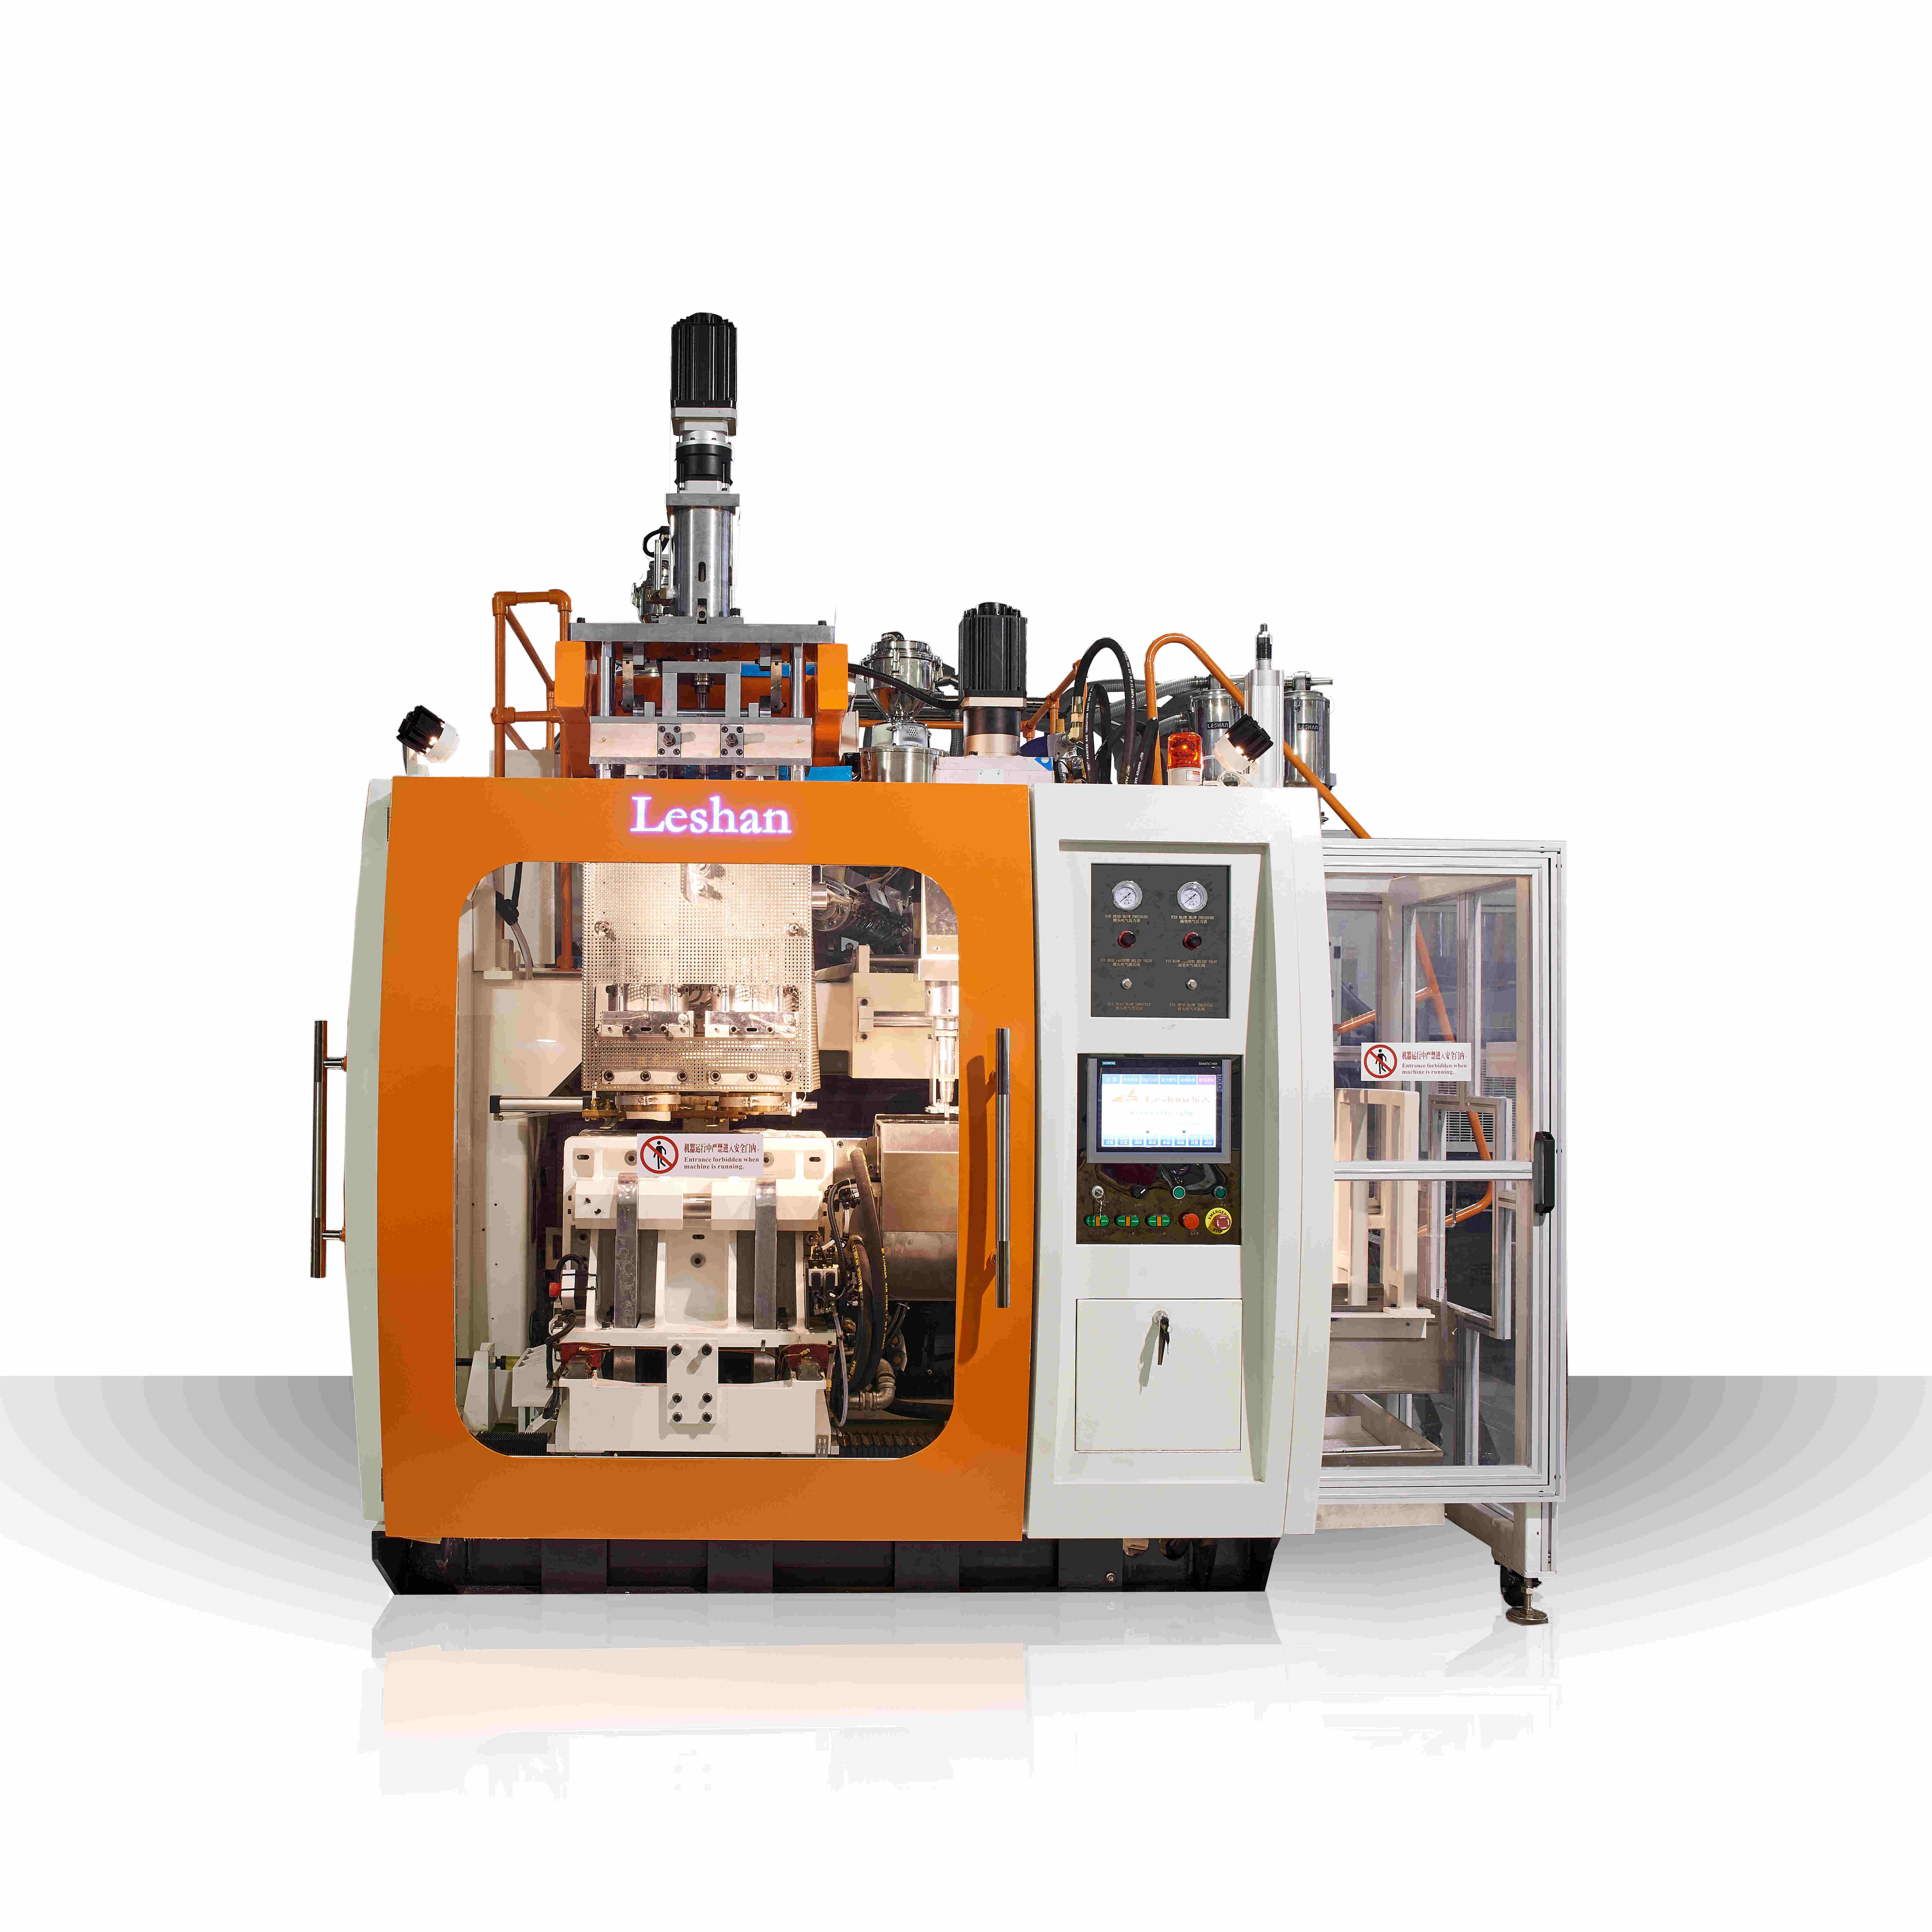 What are the main components of a china hdpe bottle blow molding machine?